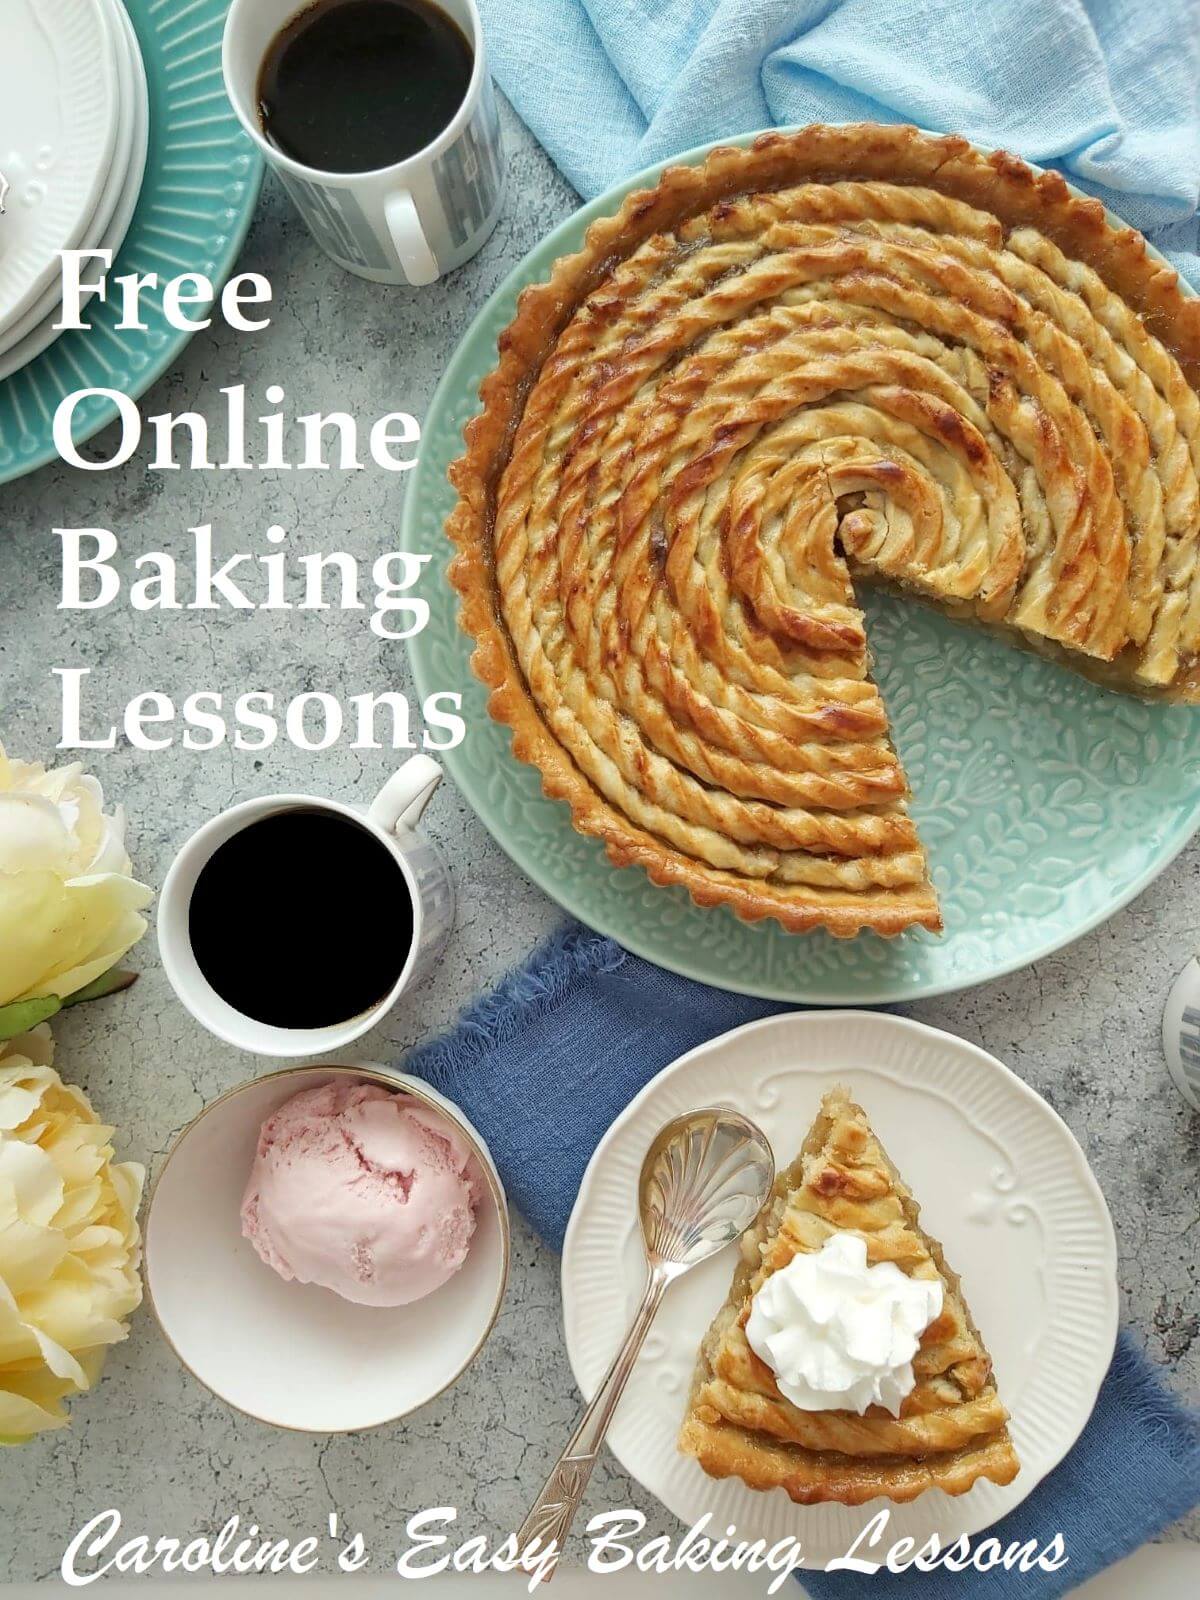 Overhead table shot of a twist top crust pie served with cream and ice cream and online baking lessons text.